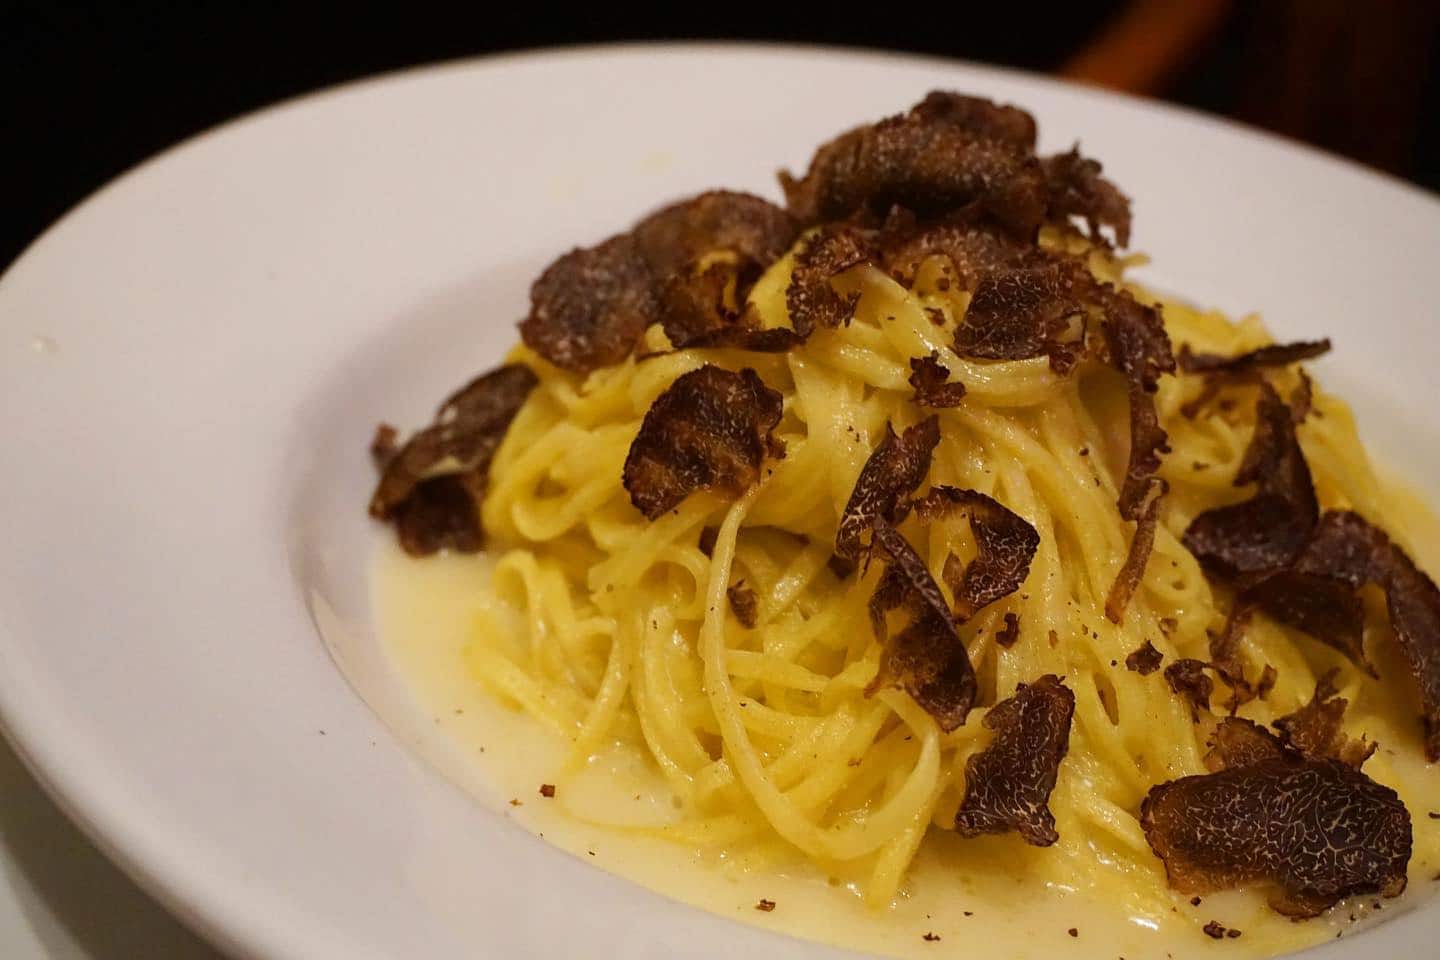 bucatini with lemon sauce and truffles on top from Riccardo's Trattoria